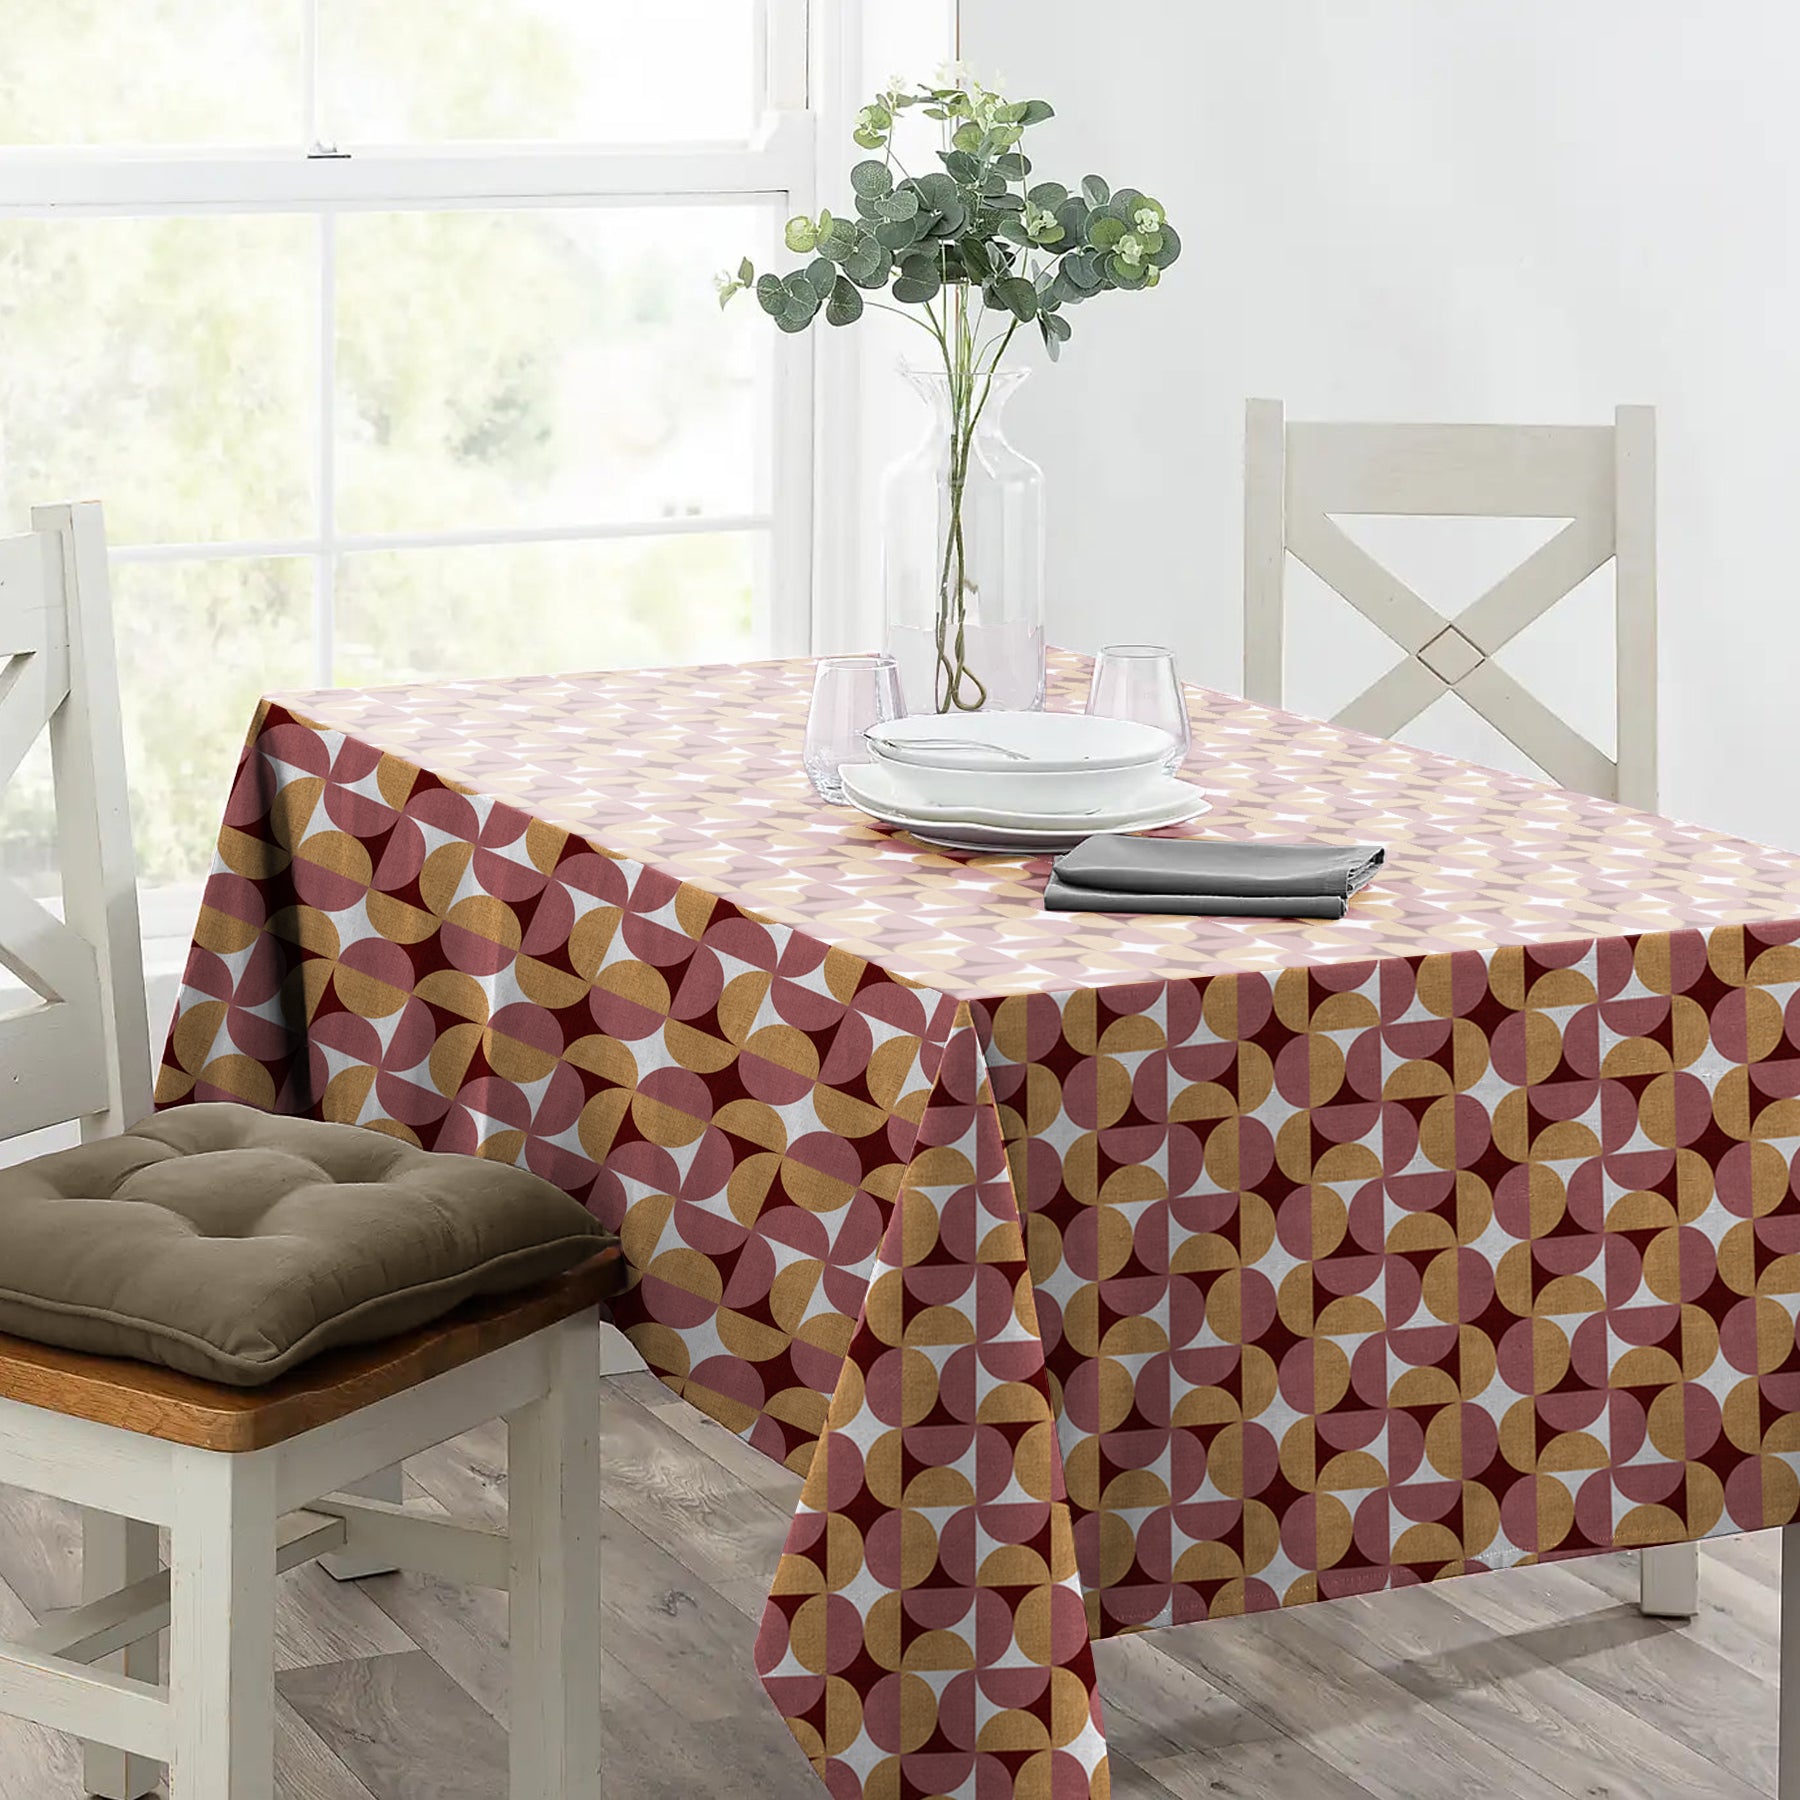 ILLUSION CIRCLE 6 SEATER TABLE CLOTH CAMEL/PINK